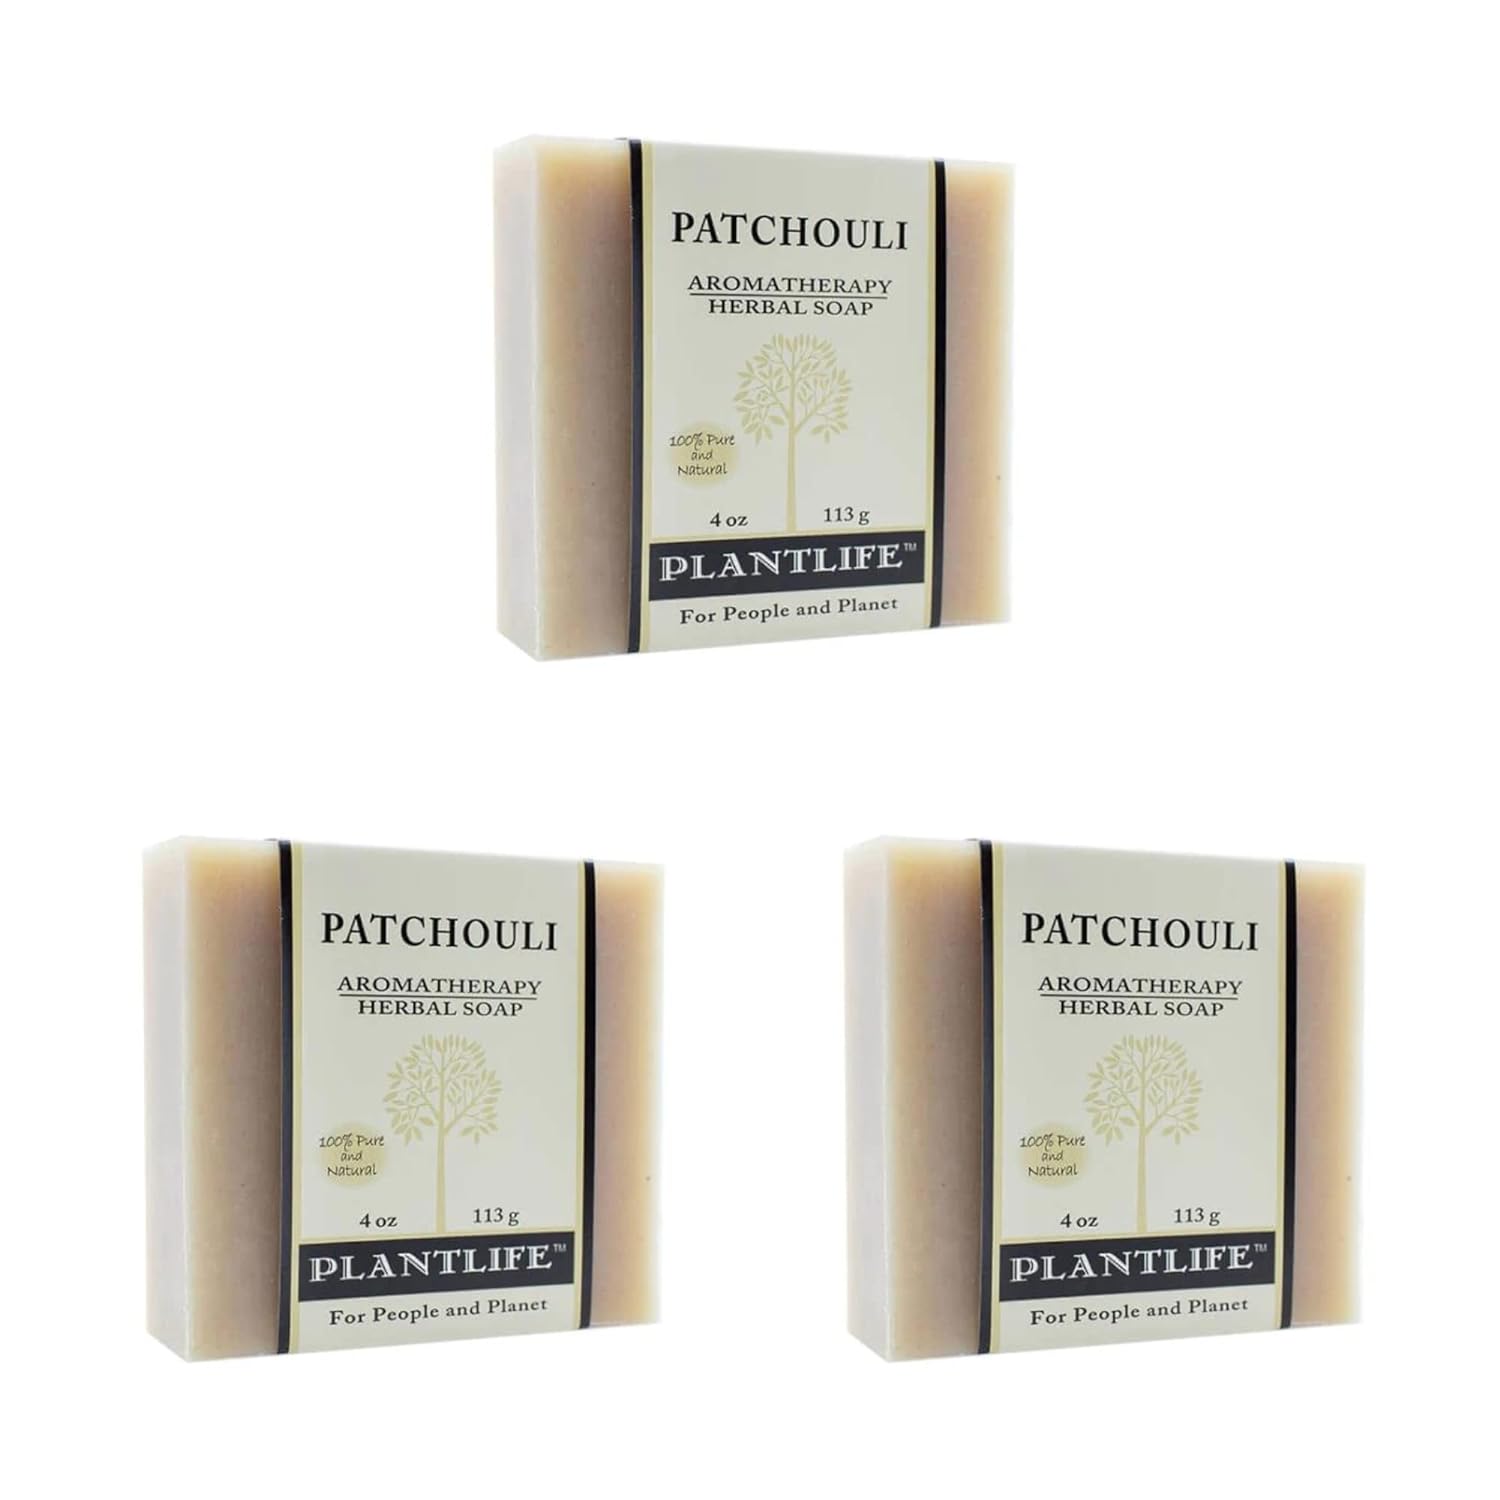 Plantlife Patchouli 3-pack Bar Soap - Moisturizing and Soothing Soap for Your Skin - Hand Crafted Using Plant-Based Ingredients - Made in California 4 Bar